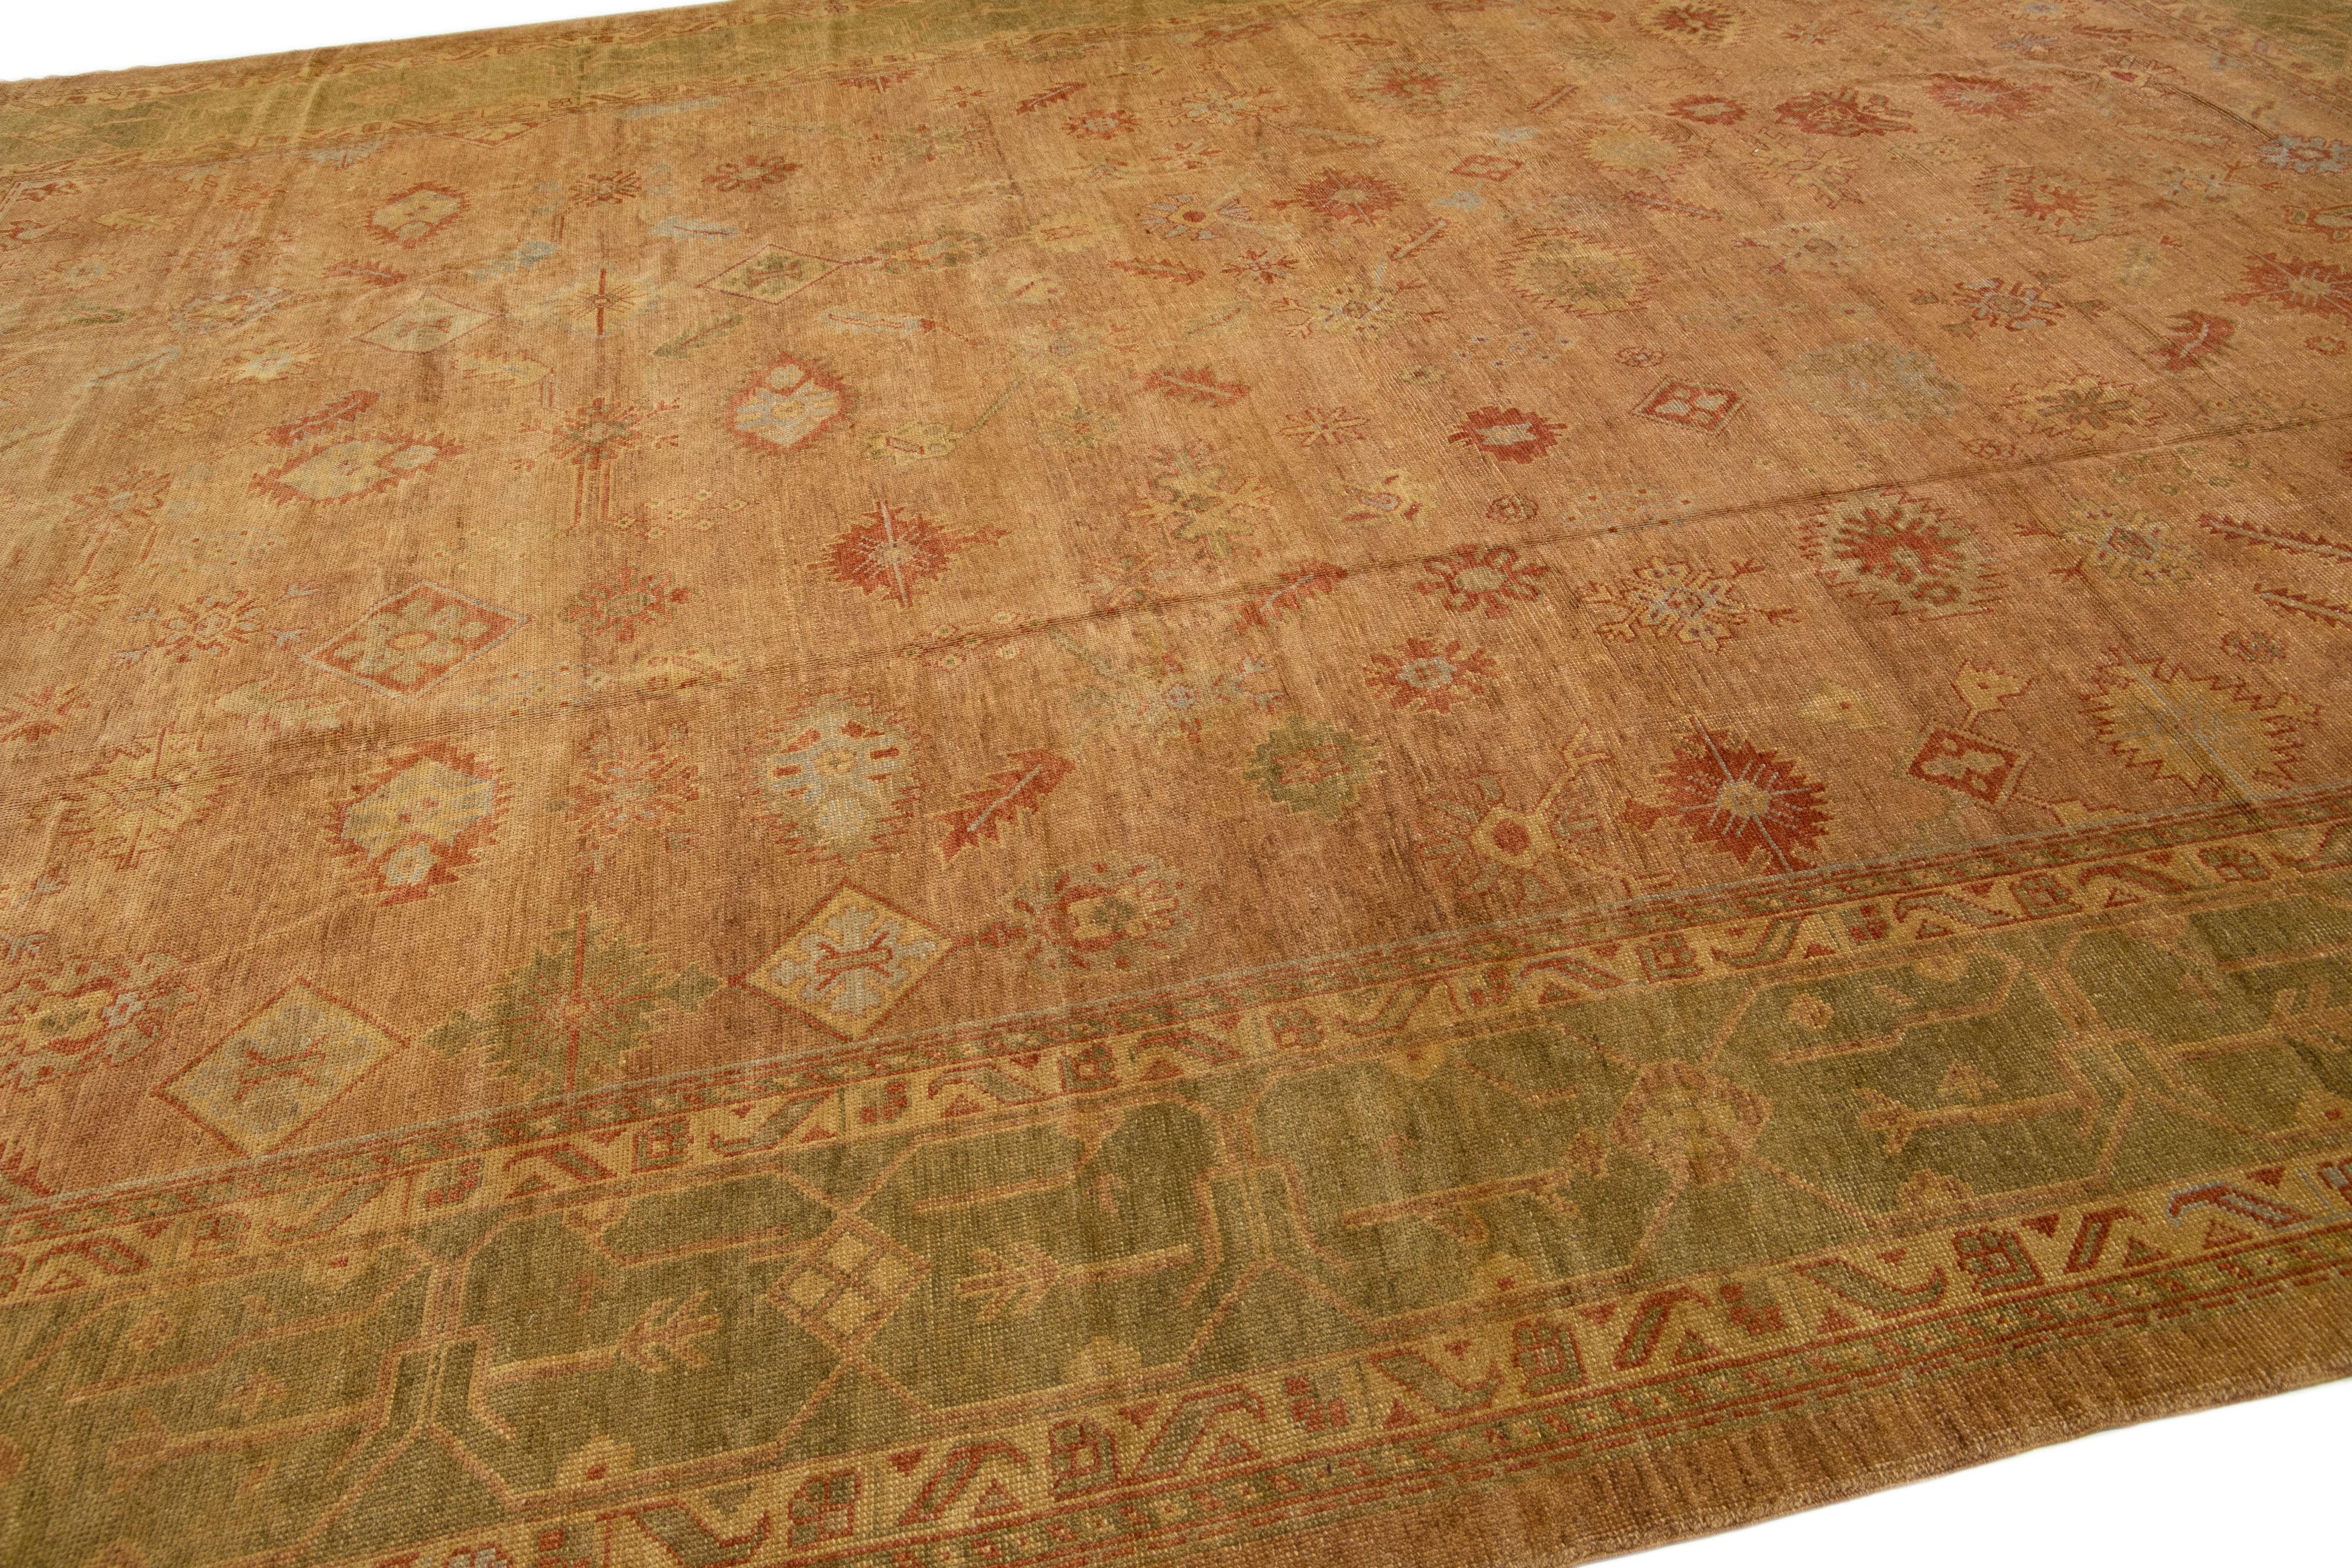 Beautiful Vintage Turkish Oushak hand-knotted wool rug with a brown color field. This rug has green and rust accents in a gorgeous large-scale floral pattern.

This rug measures: 14'4